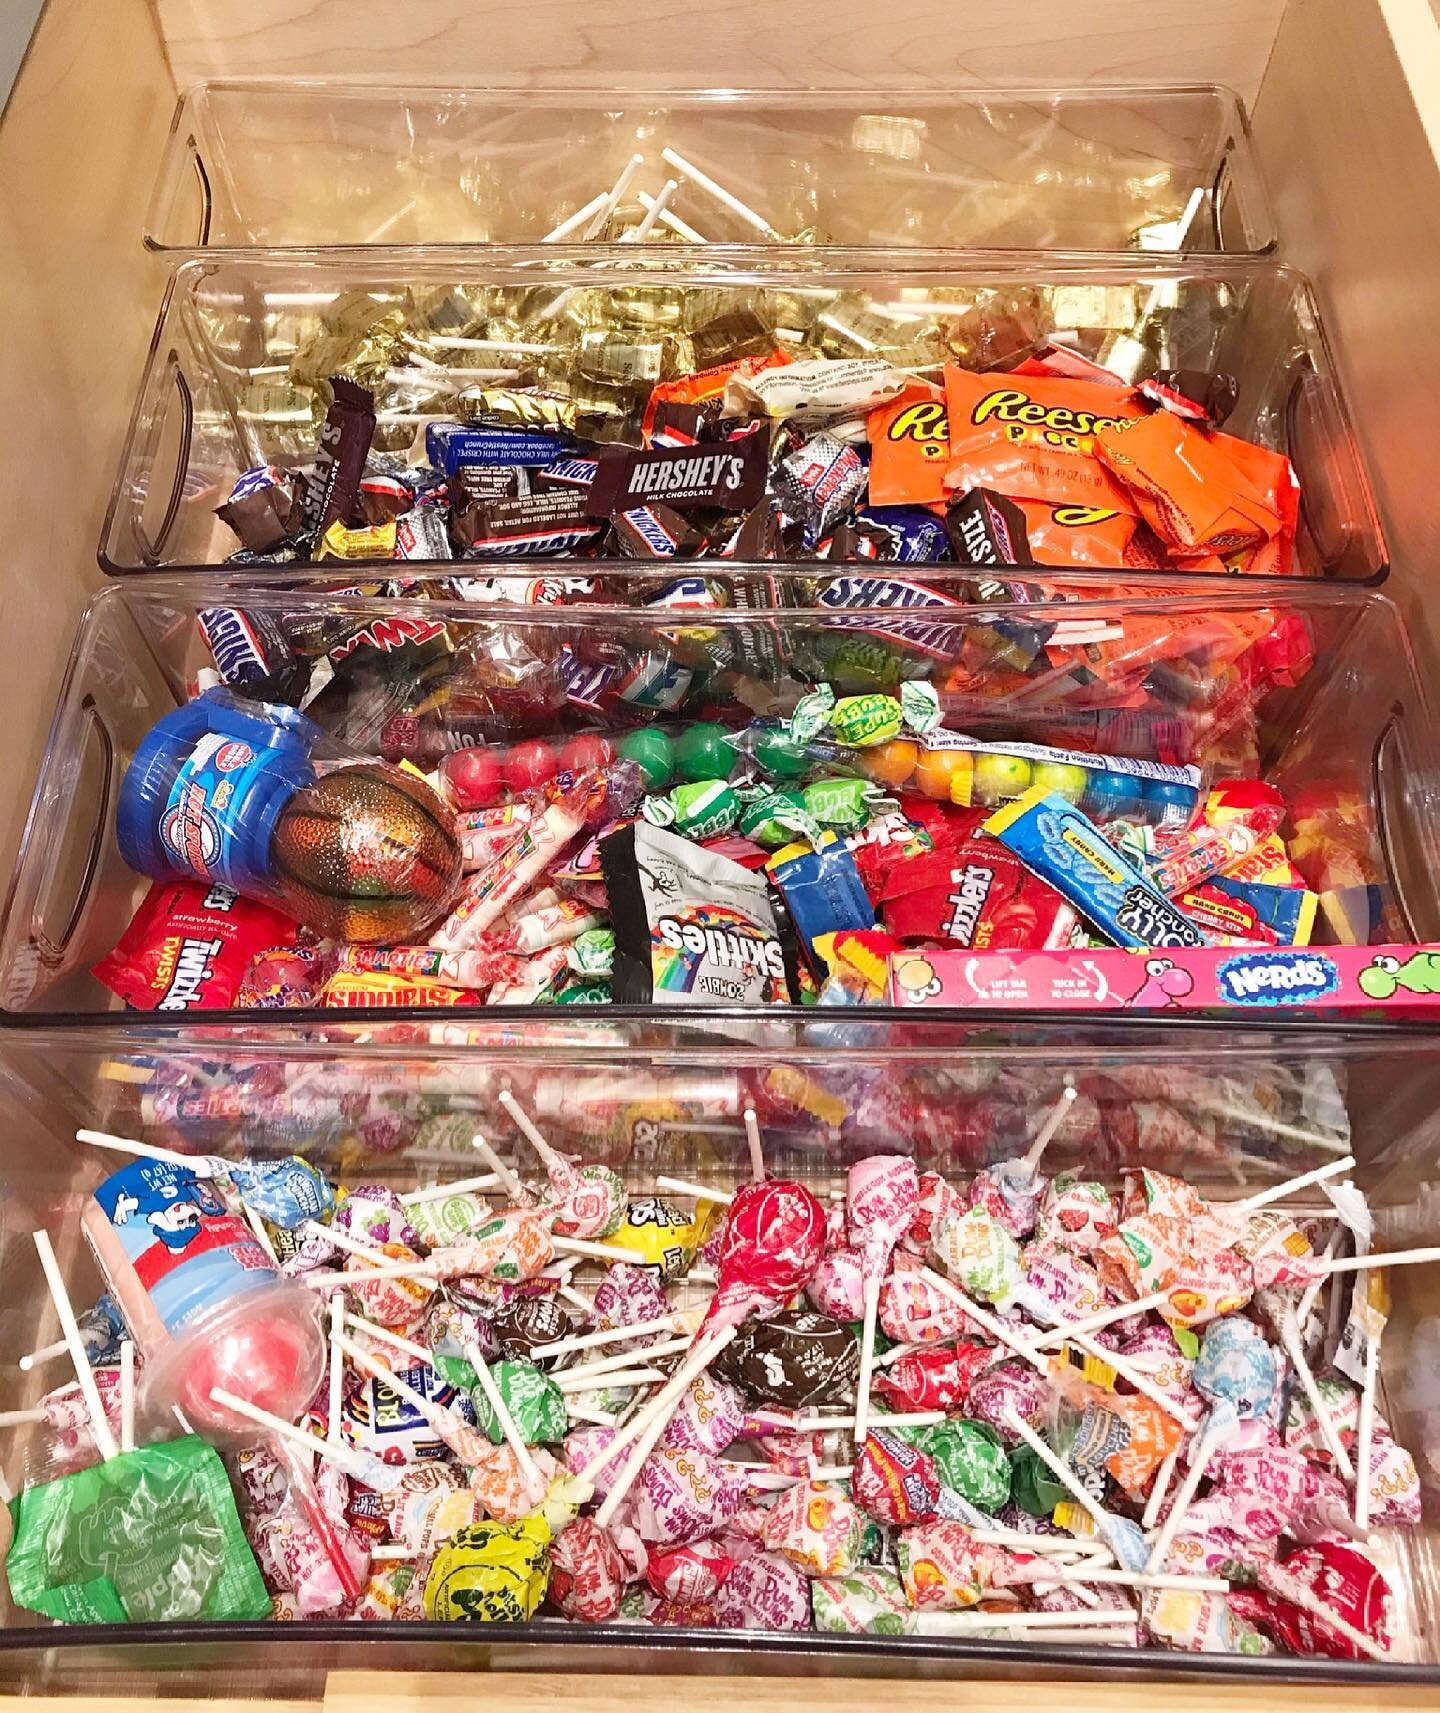 Sugar Shak Showdown 🍭! Putting candy in clear containers makes it all the better. 
. 
. 
#crosswellorganizing #candy #candydrawer #clearcontainers #sugarshak #organization #organized